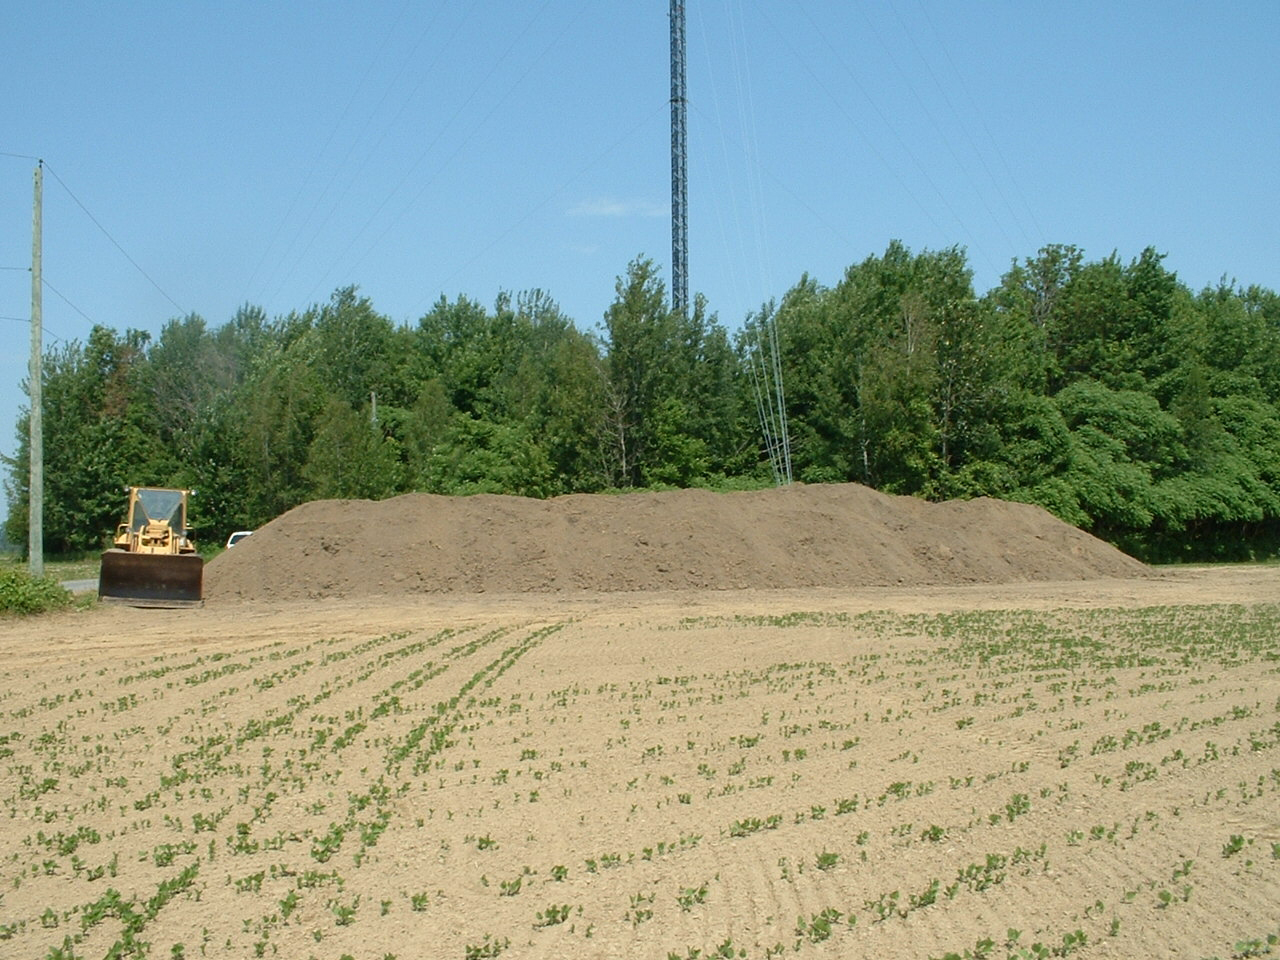 Pulp and paper biosolids piled in a long row, in a tilled field for temporary storage